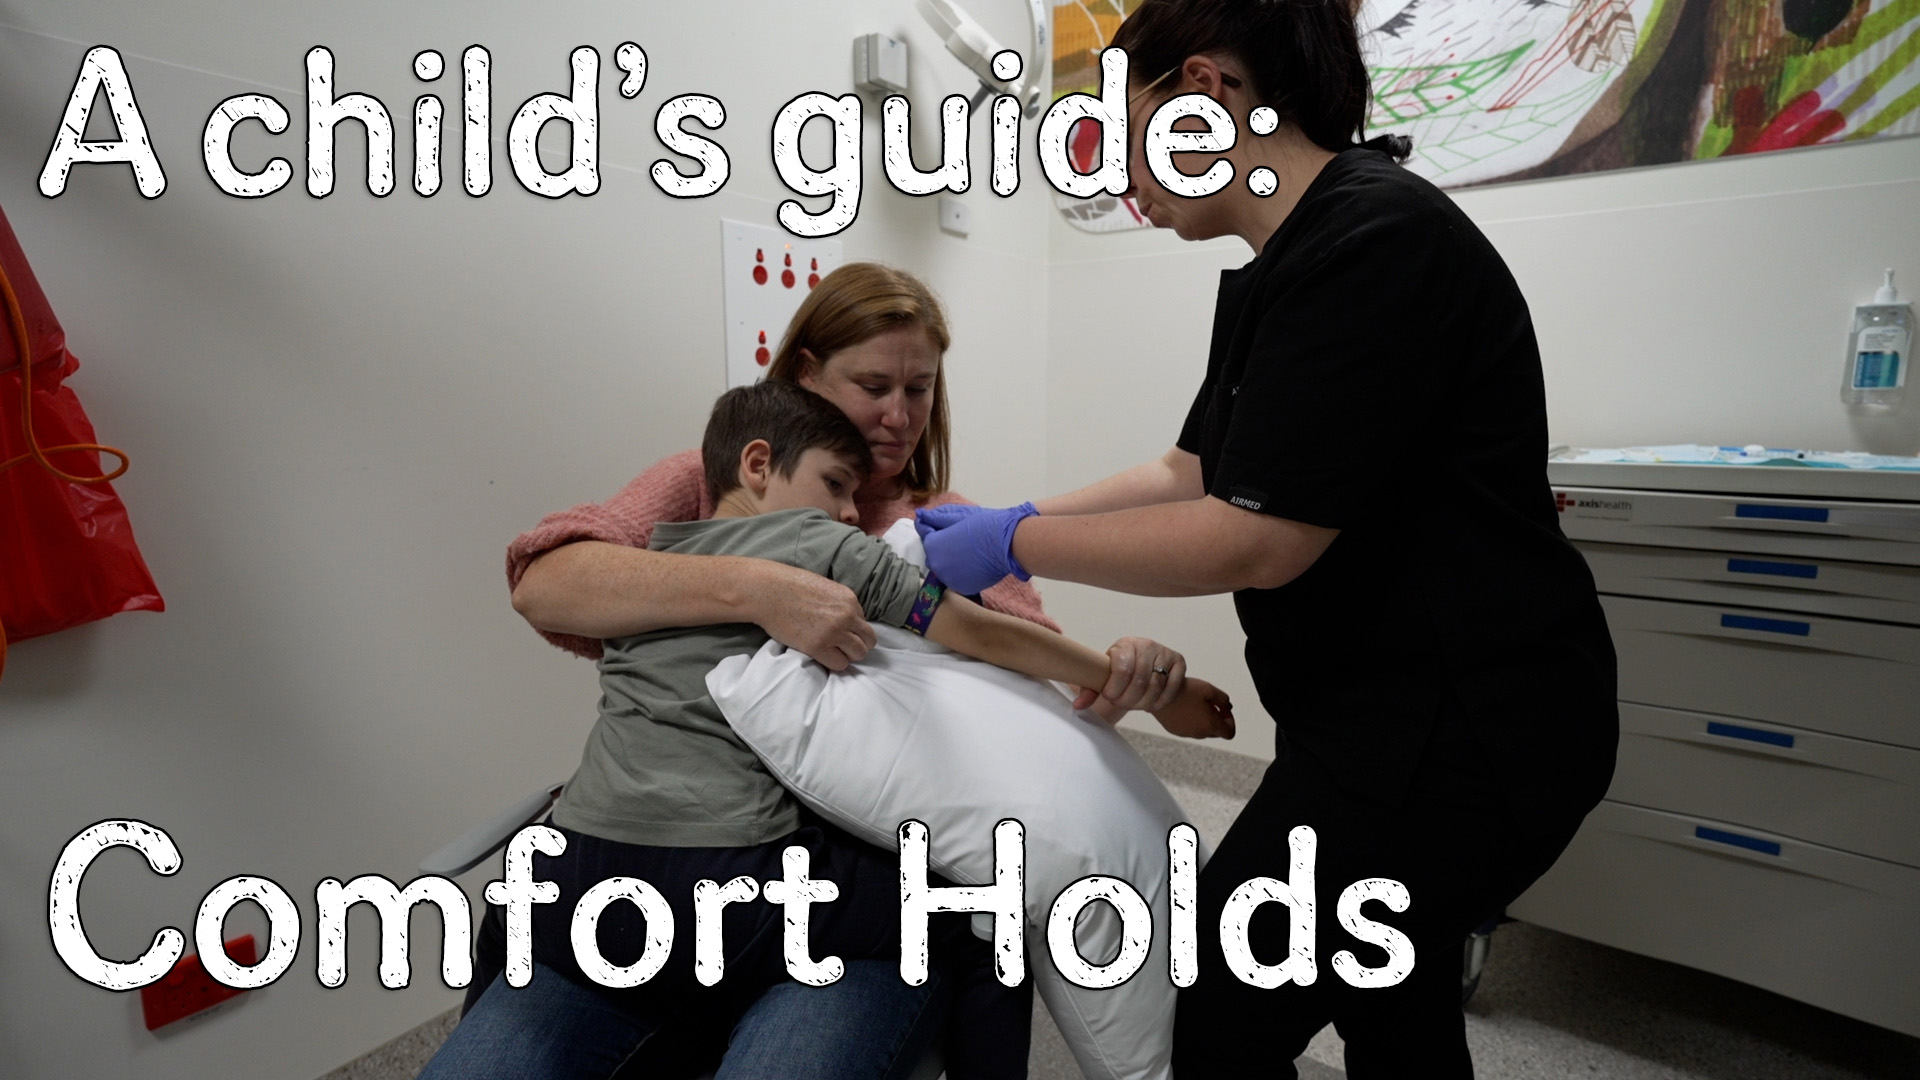 Jack tells us all about the Comfort Holds you can use at the hospital.